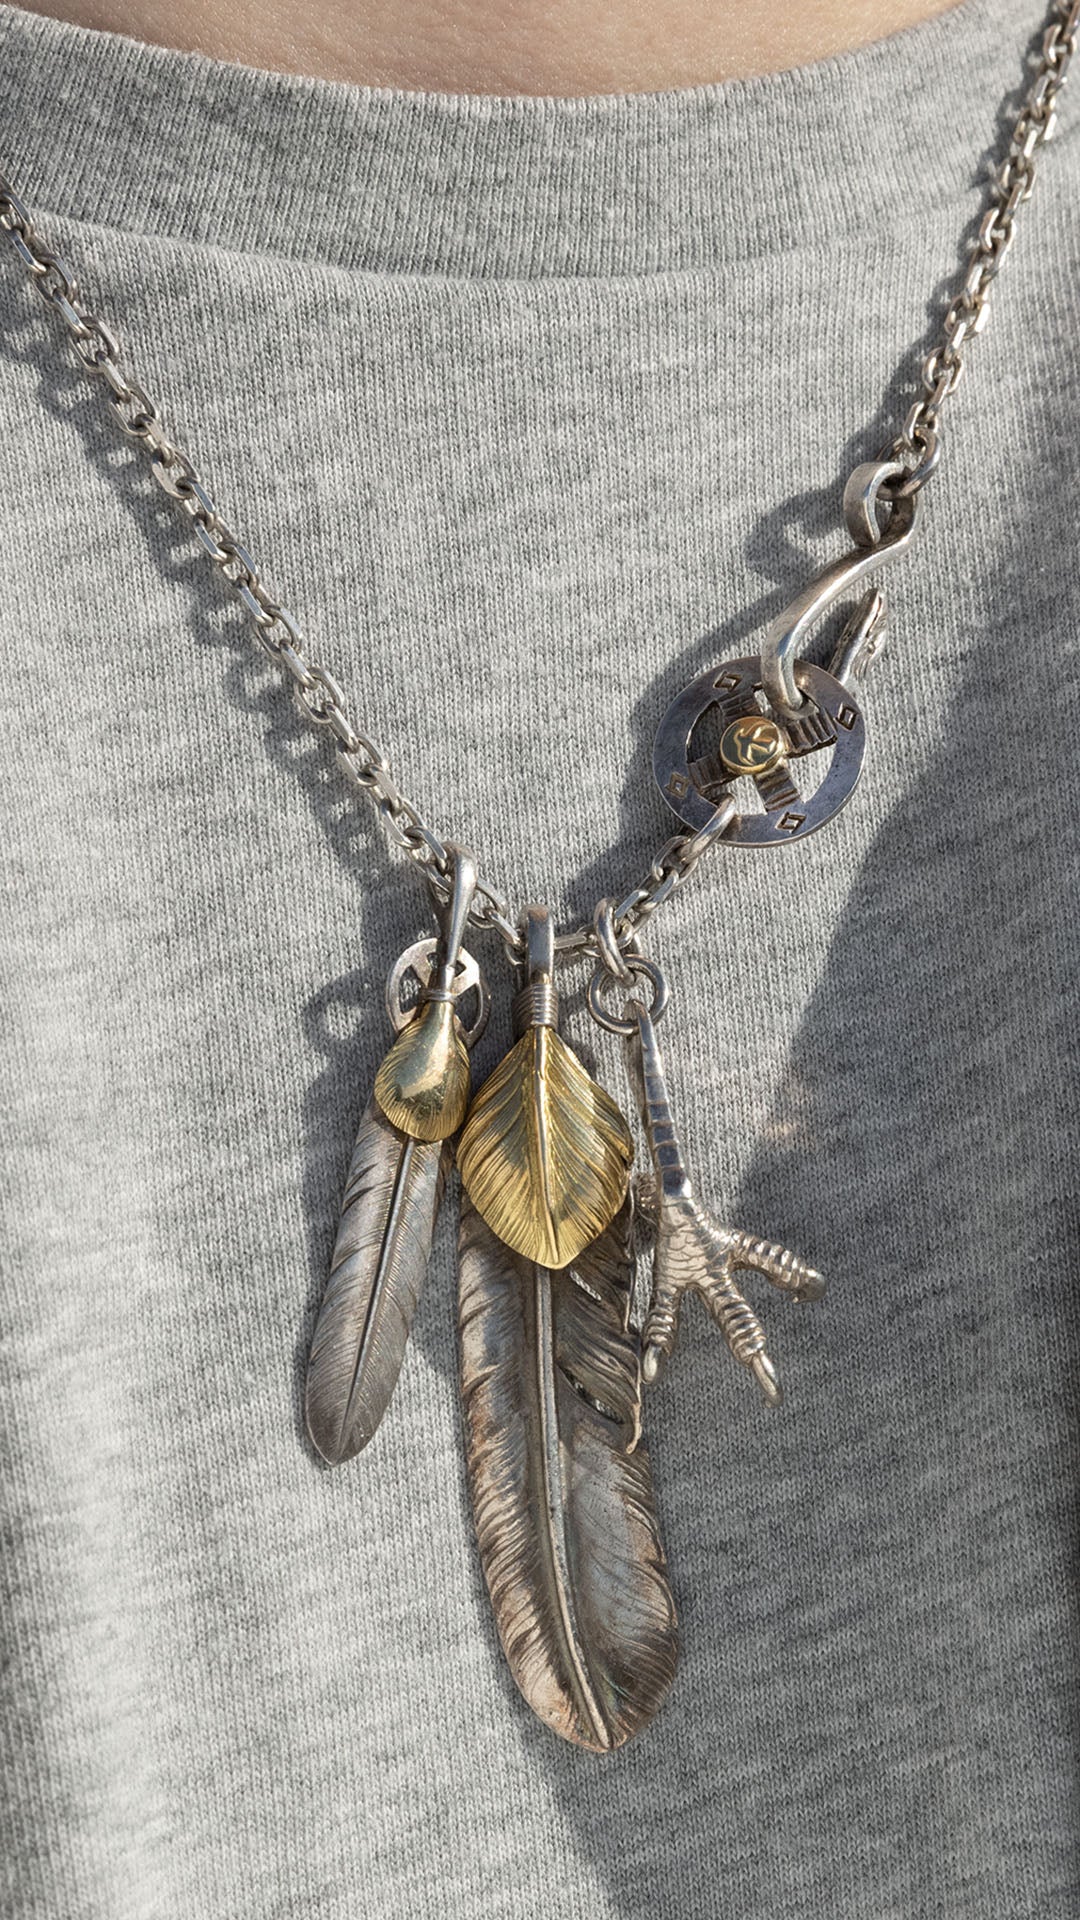 Goro's Feathers and Claw Necklace